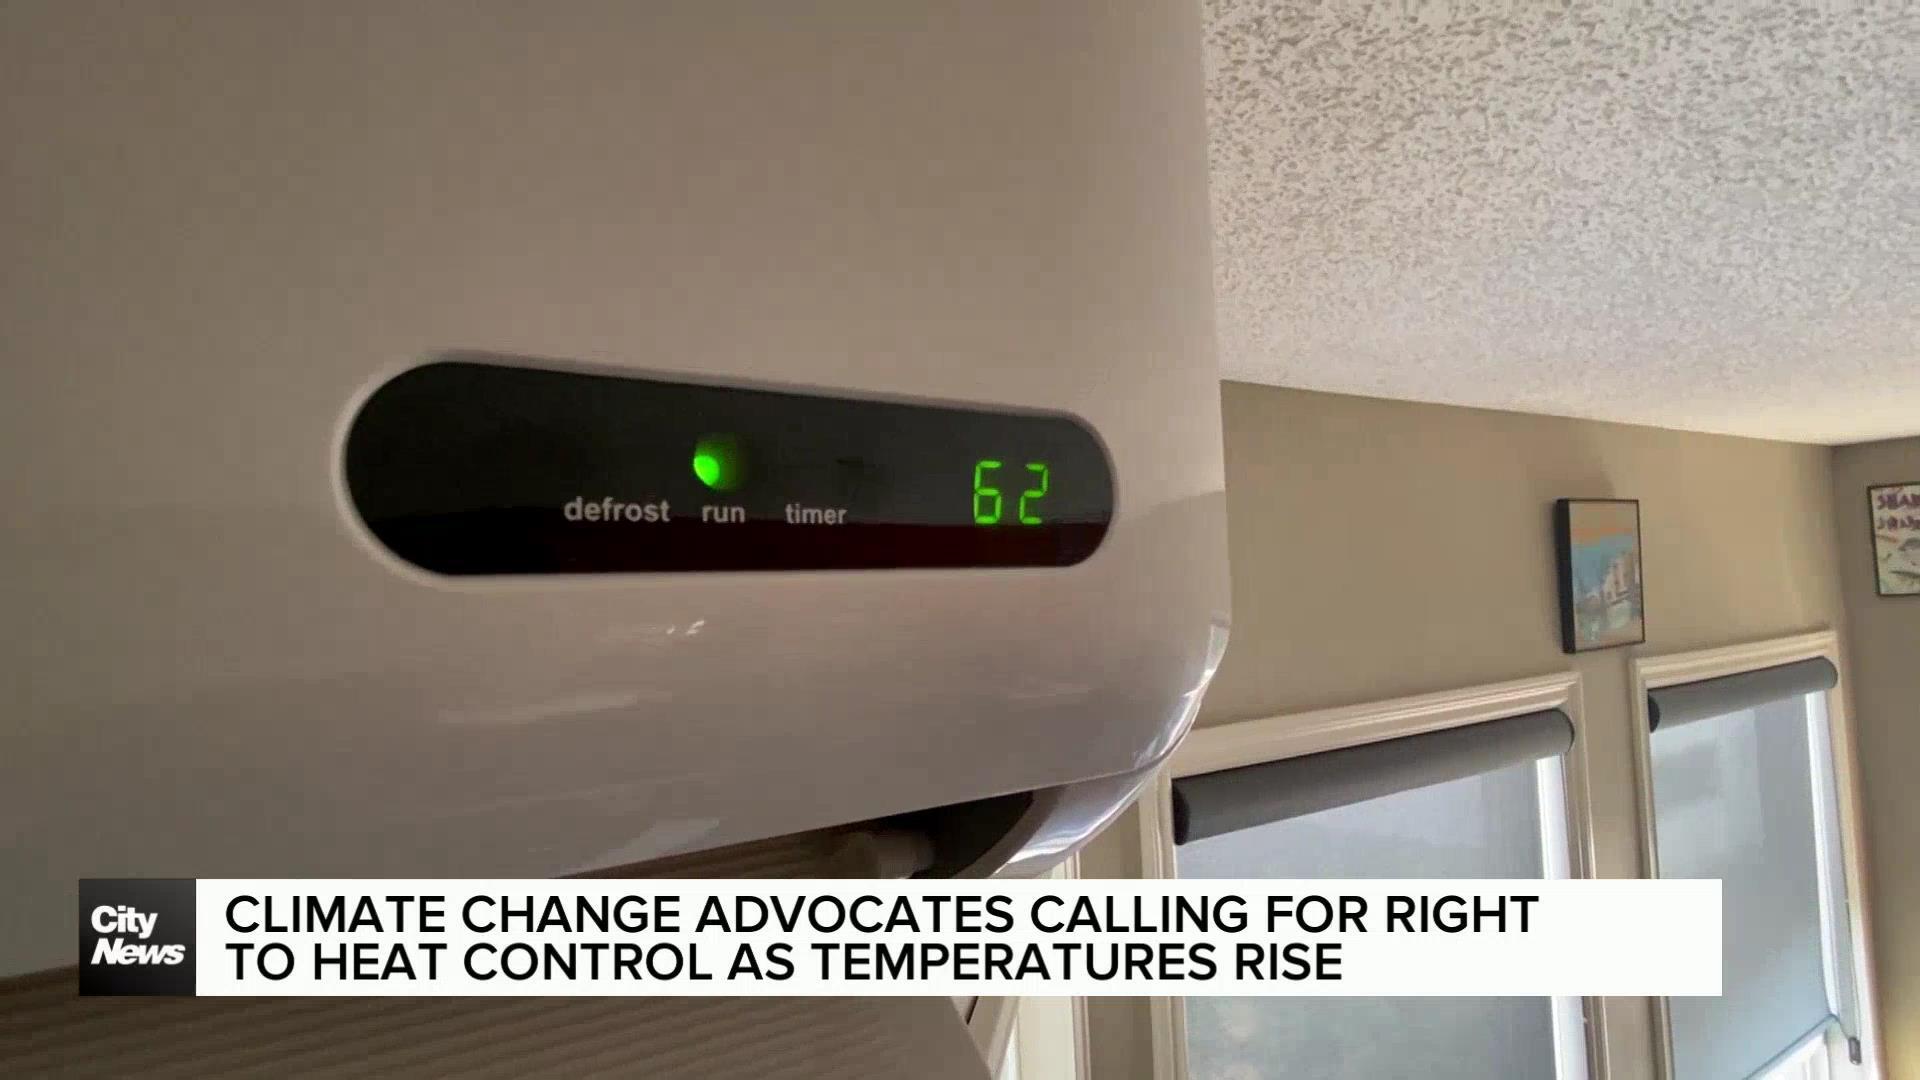 Climate change advocates call for right to heat control